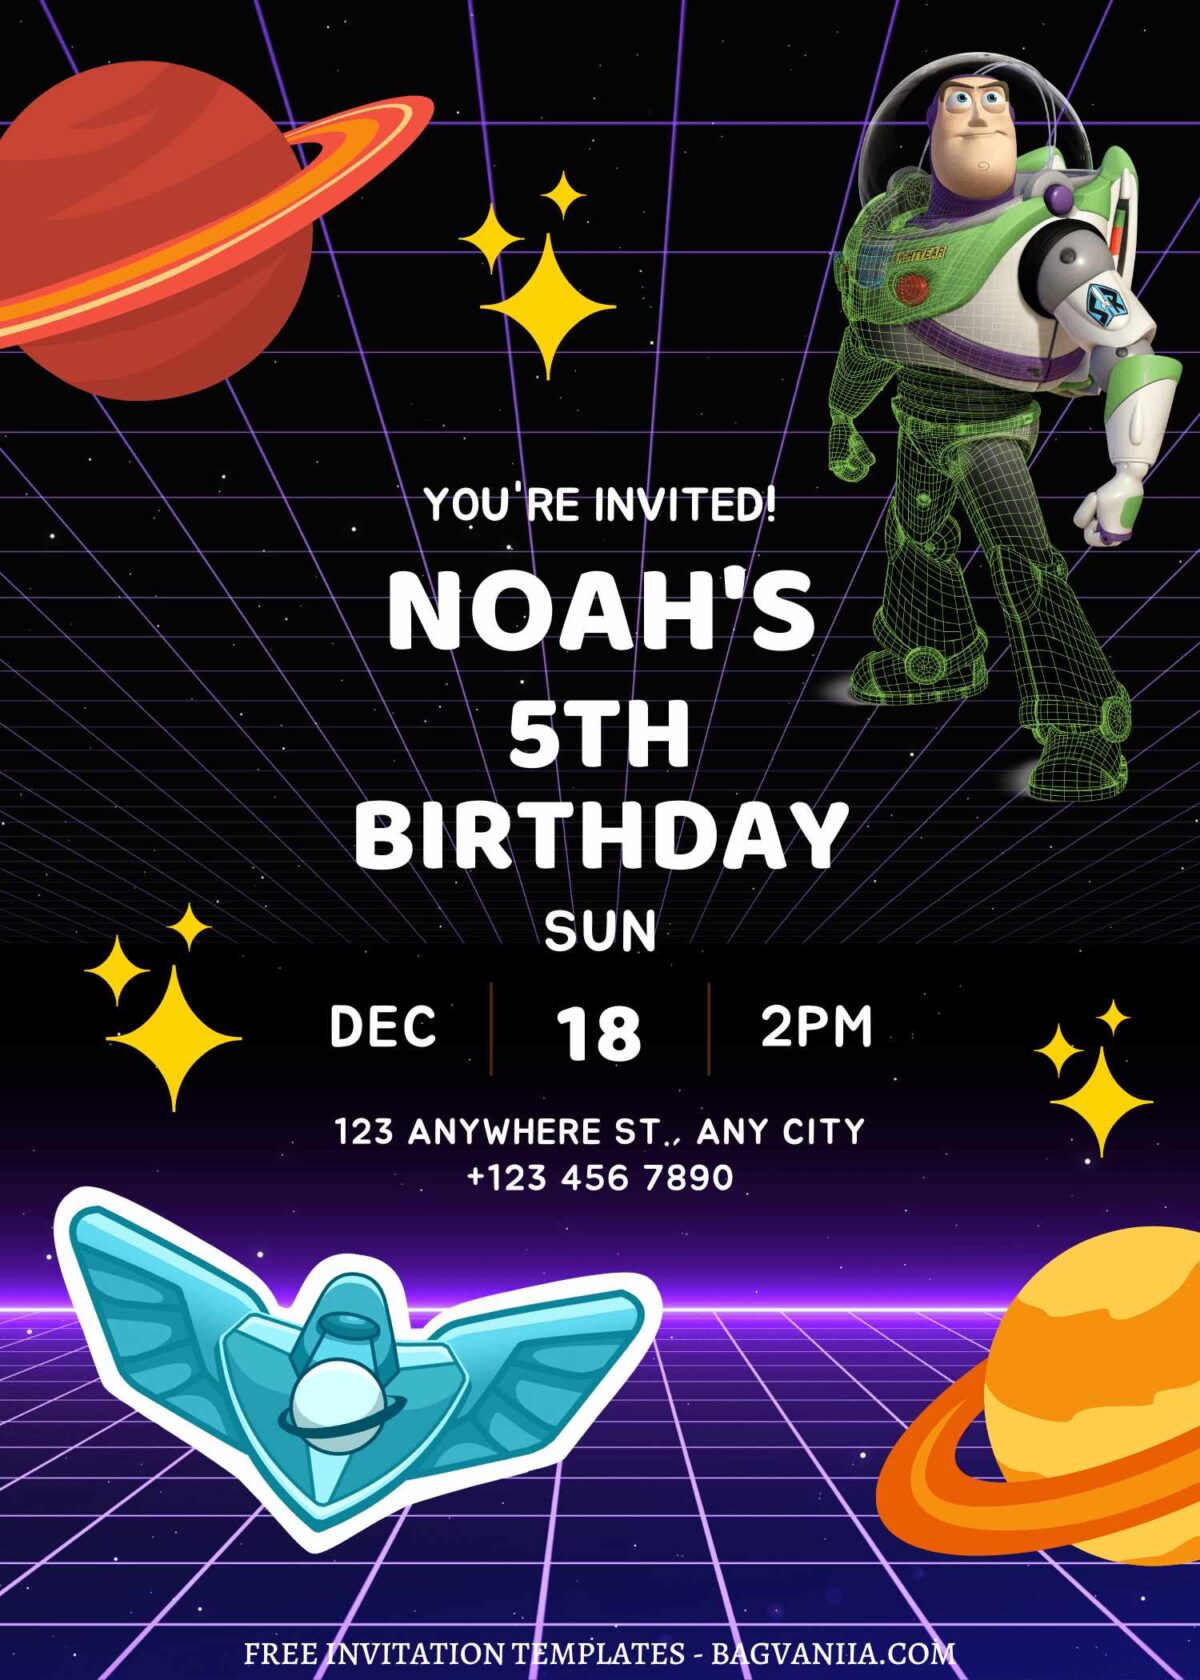 FREE EDITABLE - 8+ Space Ranger Buzz Canva Birthday Invitation Templates  with outer space planet